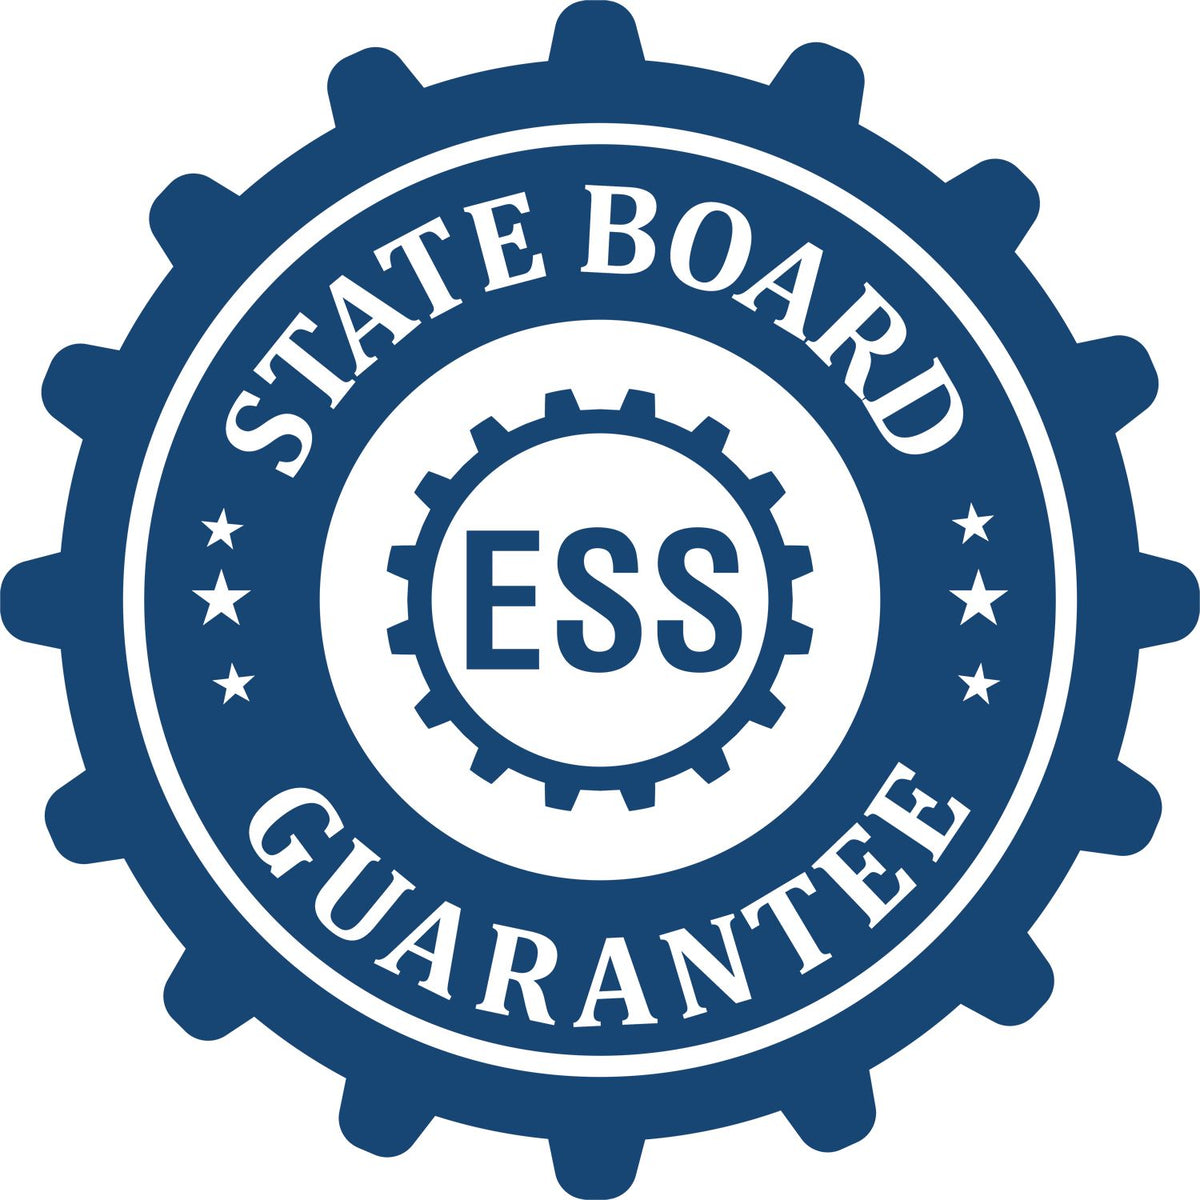 An emblem in a gear shape illustrating a state board guarantee for the Gift Massachusetts Landscape Architect Seal